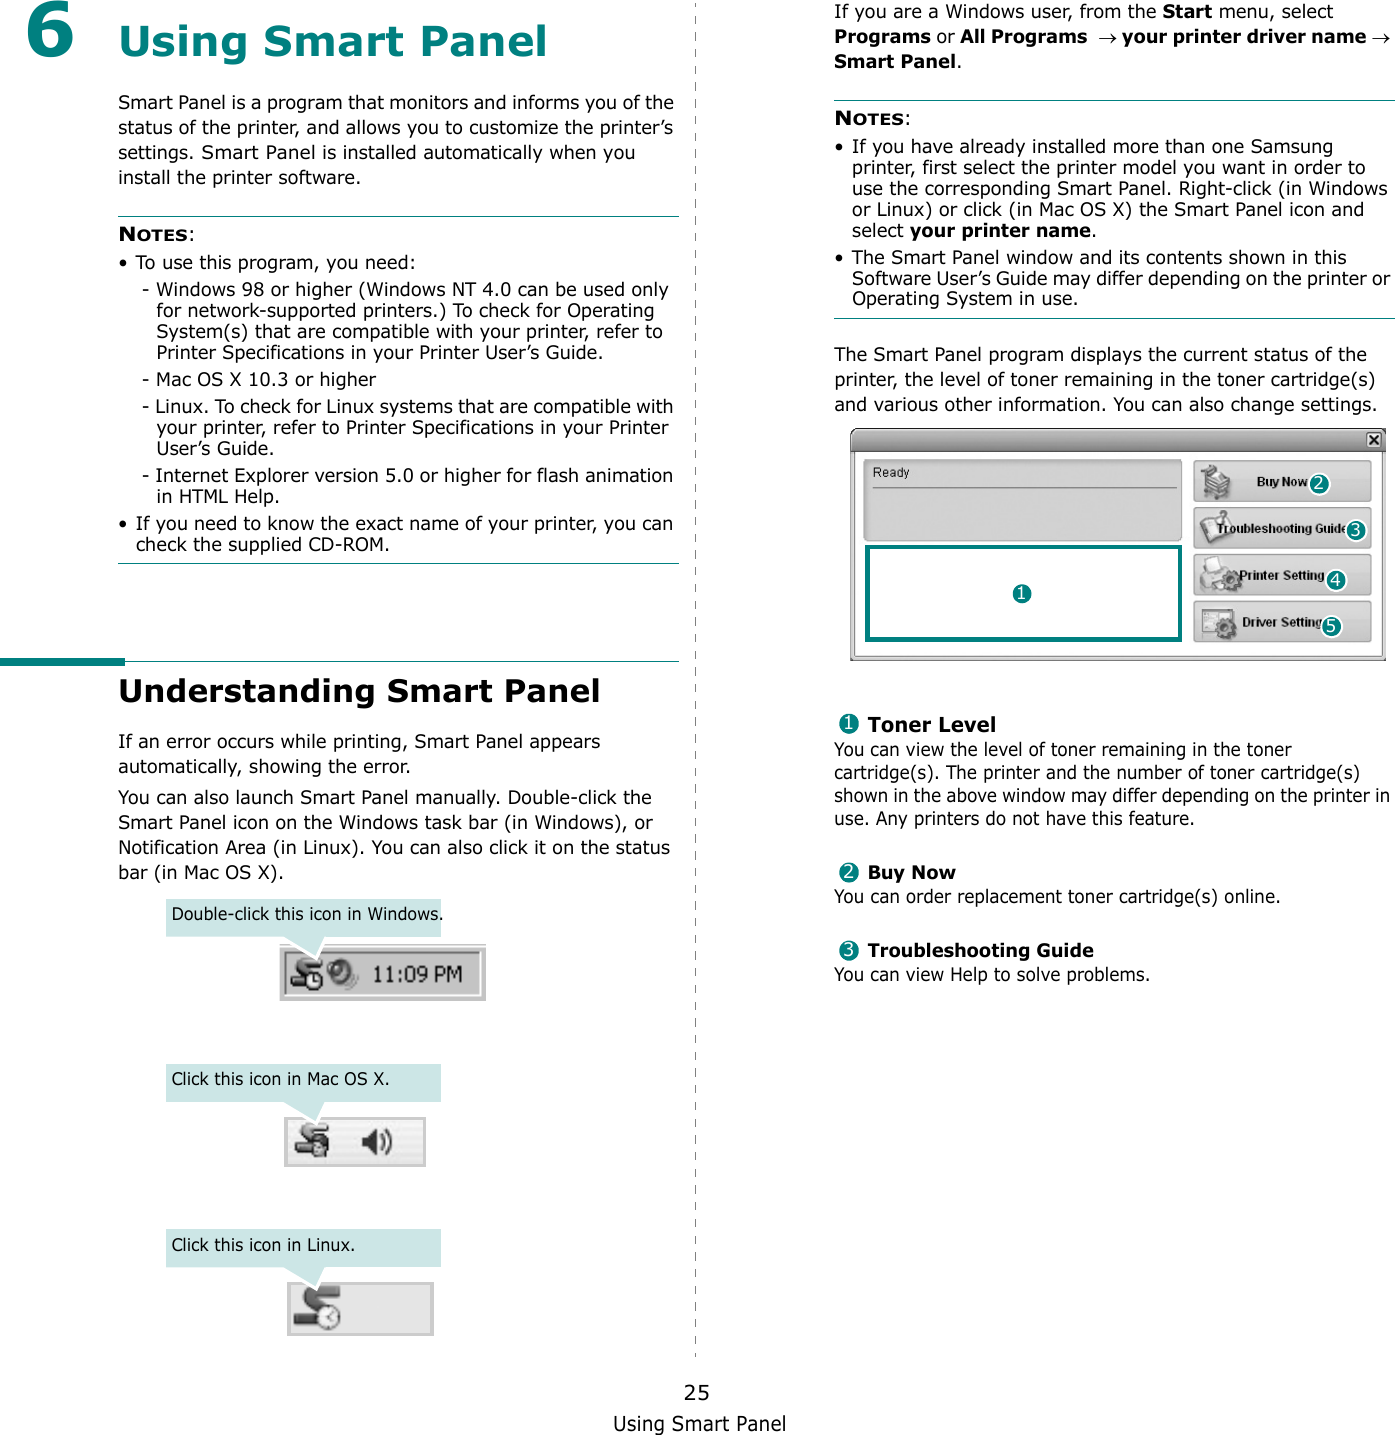 Using Smart Panel256Using Smart PanelSmart Panel is a program that monitors and informs you of the status of the printer, and allows you to customize the printer’s settings. Smart Panel is installed automatically when you install the printer software.NOTES:• To use this program, you need:- Windows 98 or higher (Windows NT 4.0 can be used only for network-supported printers.) To check for Operating System(s) that are compatible with your printer, refer to Printer Specifications in your Printer User’s Guide.- Mac OS X 10.3 or higher- Linux. To check for Linux systems that are compatible with your printer, refer to Printer Specifications in your Printer User’s Guide.- Internet Explorer version 5.0 or higher for flash animation in HTML Help.• If you need to know the exact name of your printer, you can check the supplied CD-ROM.Understanding Smart PanelIf an error occurs while printing, Smart Panel appears automatically, showing the error.You can also launch Smart Panel manually. Double-click the Smart Panel icon on the Windows task bar (in Windows), or Notification Area (in Linux). You can also click it on the status bar (in Mac OS X).Double-click this icon in Windows.Click this icon in Mac OS X.Click this icon in Linux.If you are a Windows user, from the Start menu, select Programs or All Programs  → your printer driver name → Smart Panel.NOTES: • If you have already installed more than one Samsung printer, first select the printer model you want in order to use the corresponding Smart Panel. Right-click (in Windows or Linux) or click (in Mac OS X) the Smart Panel icon and select your printer name.• The Smart Panel window and its contents shown in this Software User’s Guide may differ depending on the printer or Operating System in use.The Smart Panel program displays the current status of the printer, the level of toner remaining in the toner cartridge(s) and various other information. You can also change settings.Toner LevelYou can view the level of toner remaining in the toner cartridge(s). The printer and the number of toner cartridge(s) shown in the above window may differ depending on the printer in use. Any printers do not have this feature.Buy NowYou can order replacement toner cartridge(s) online.Troubleshooting GuideYou can view Help to solve problems.24153123